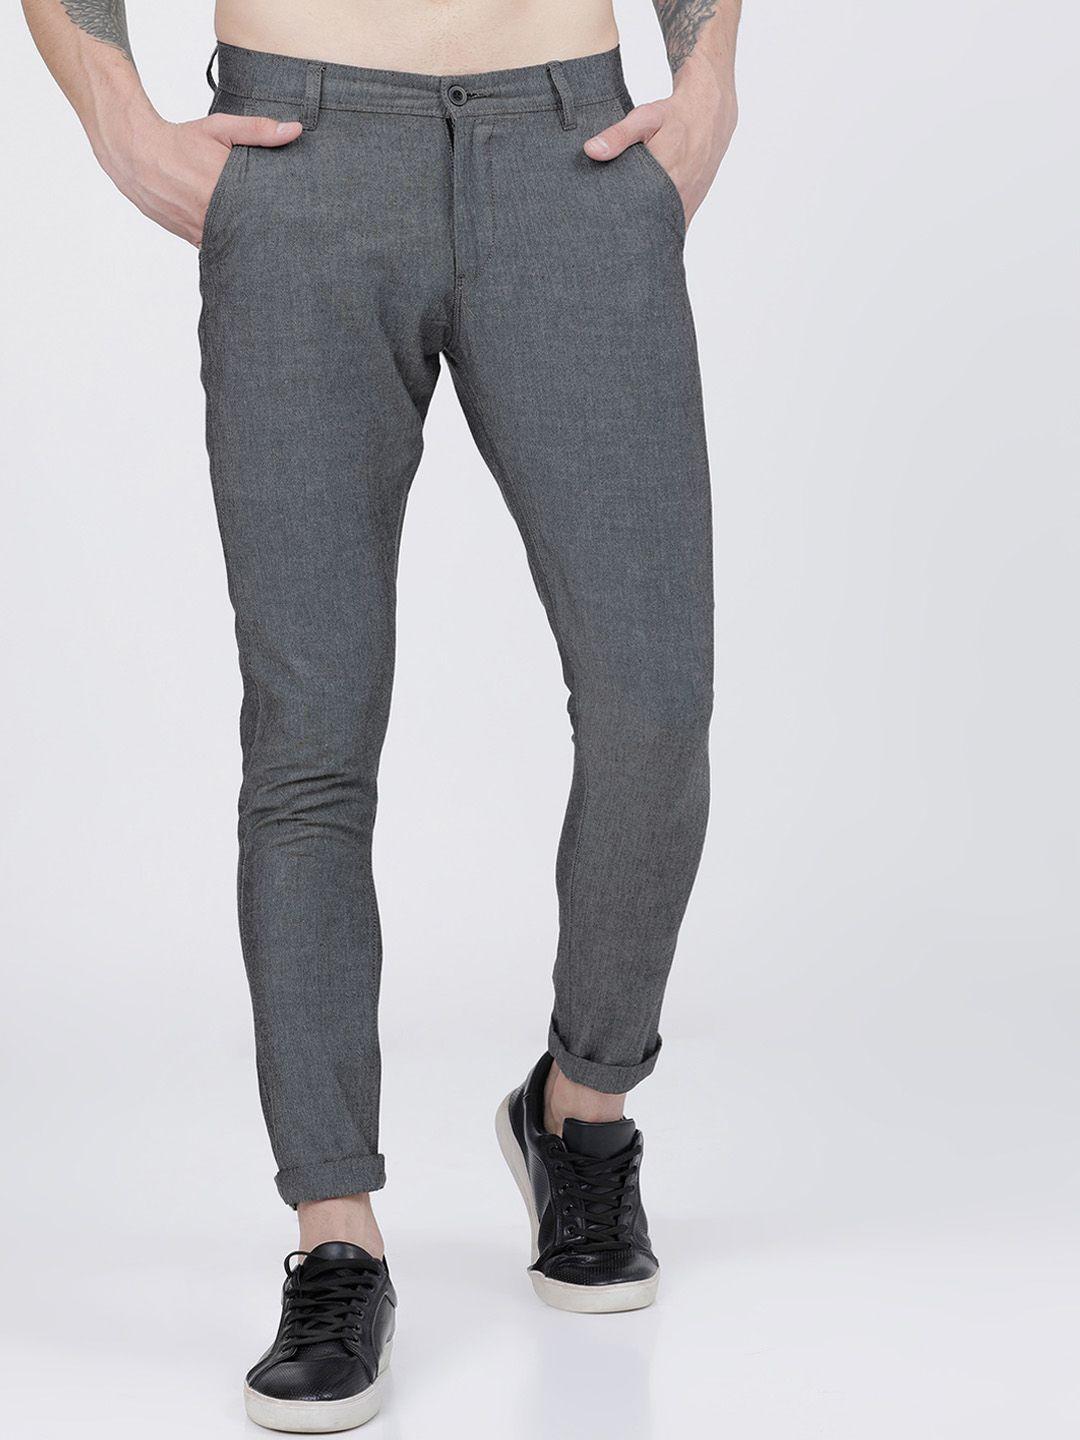 highlander-men-charcoal-grey-slim-fit-chinos-trousers